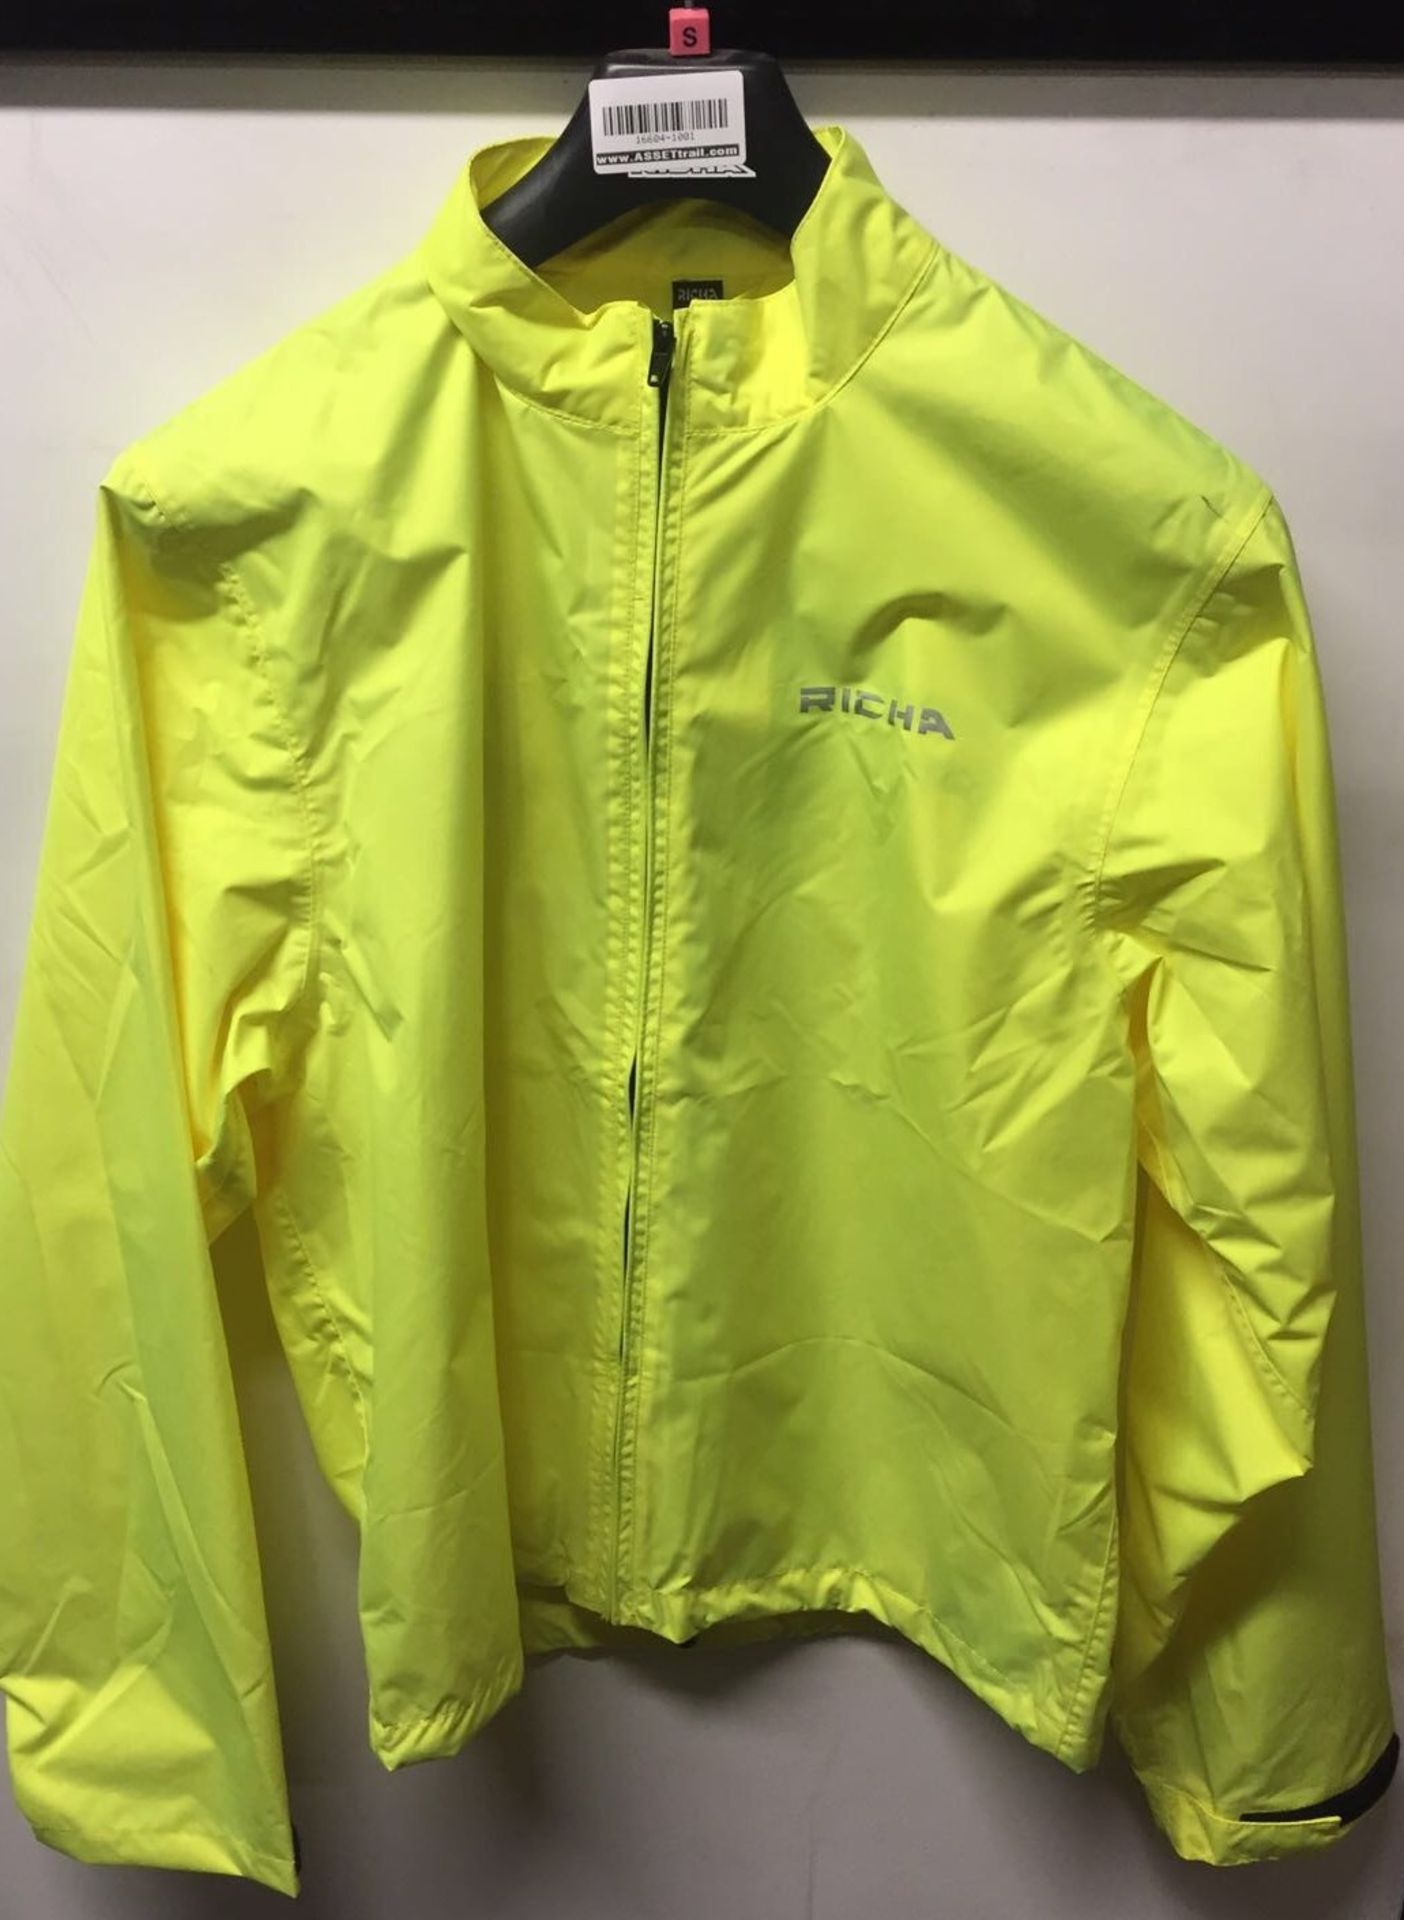 3 x Richa Fluorescent Yellow Motorcycle Over Jackets | Sizes: S,L,XL | RRP£75